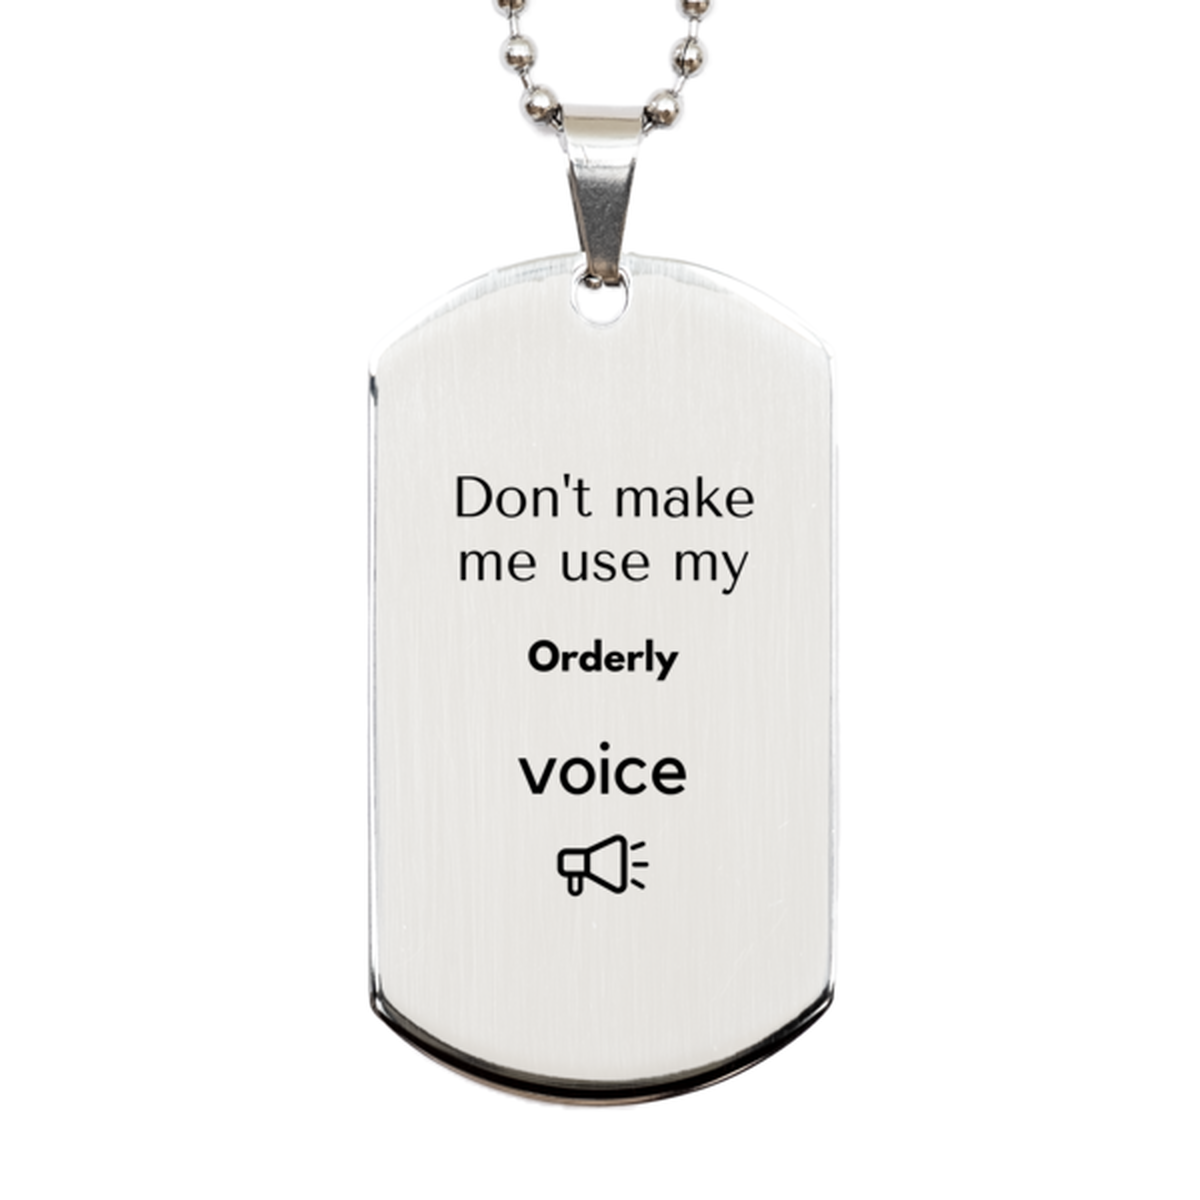 Don't make me use my Orderly voice, Sarcasm Orderly Gifts, Christmas Orderly Silver Dog Tag Birthday Unique Gifts For Orderly Coworkers, Men, Women, Colleague, Friends